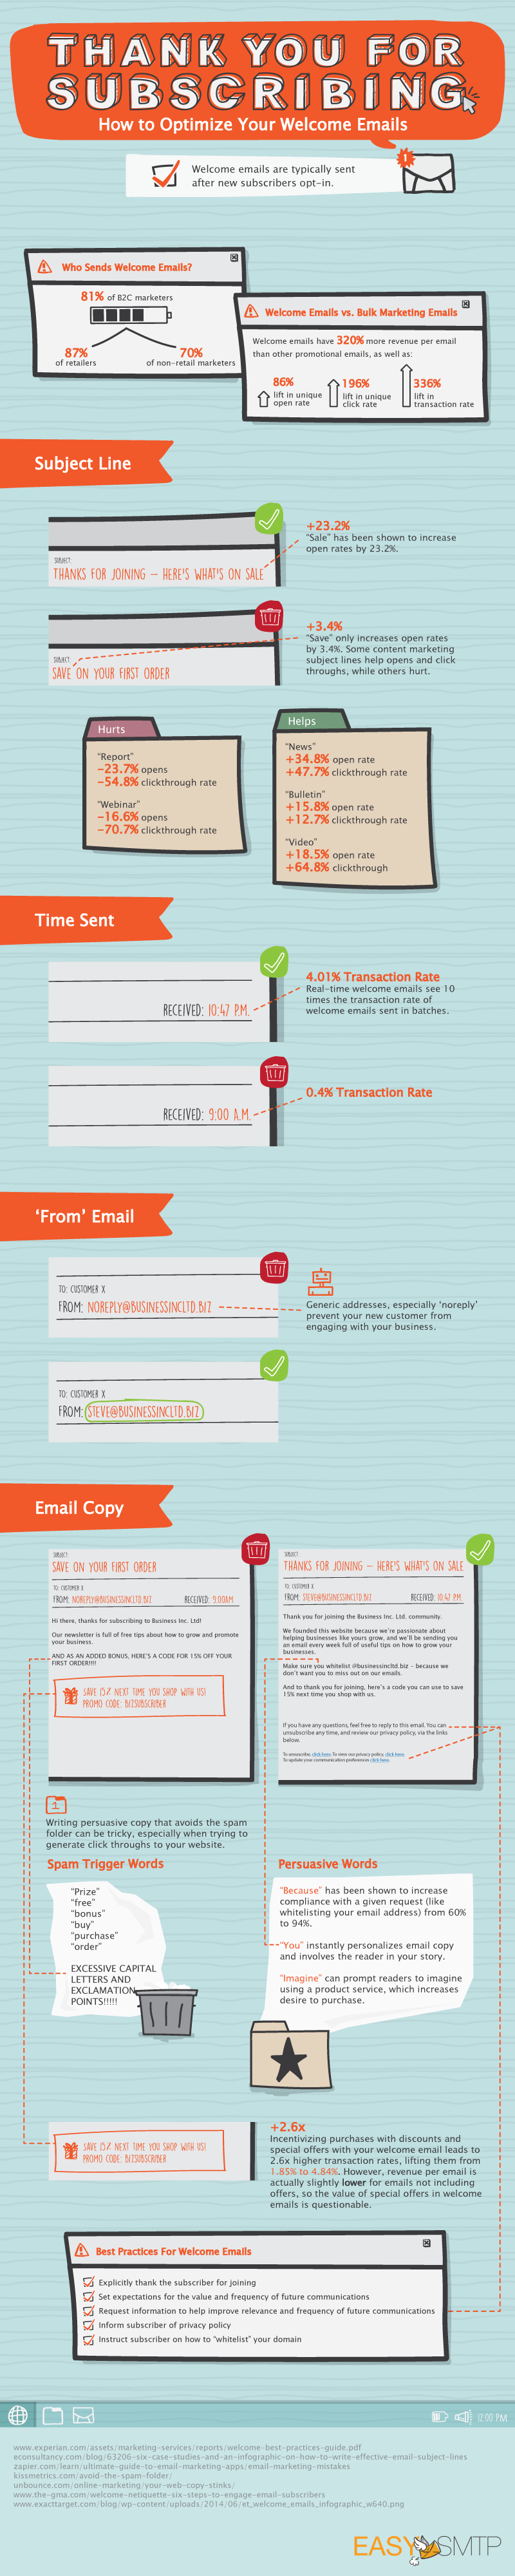 1429736825-thank-you-for-subscribing-infographic.png